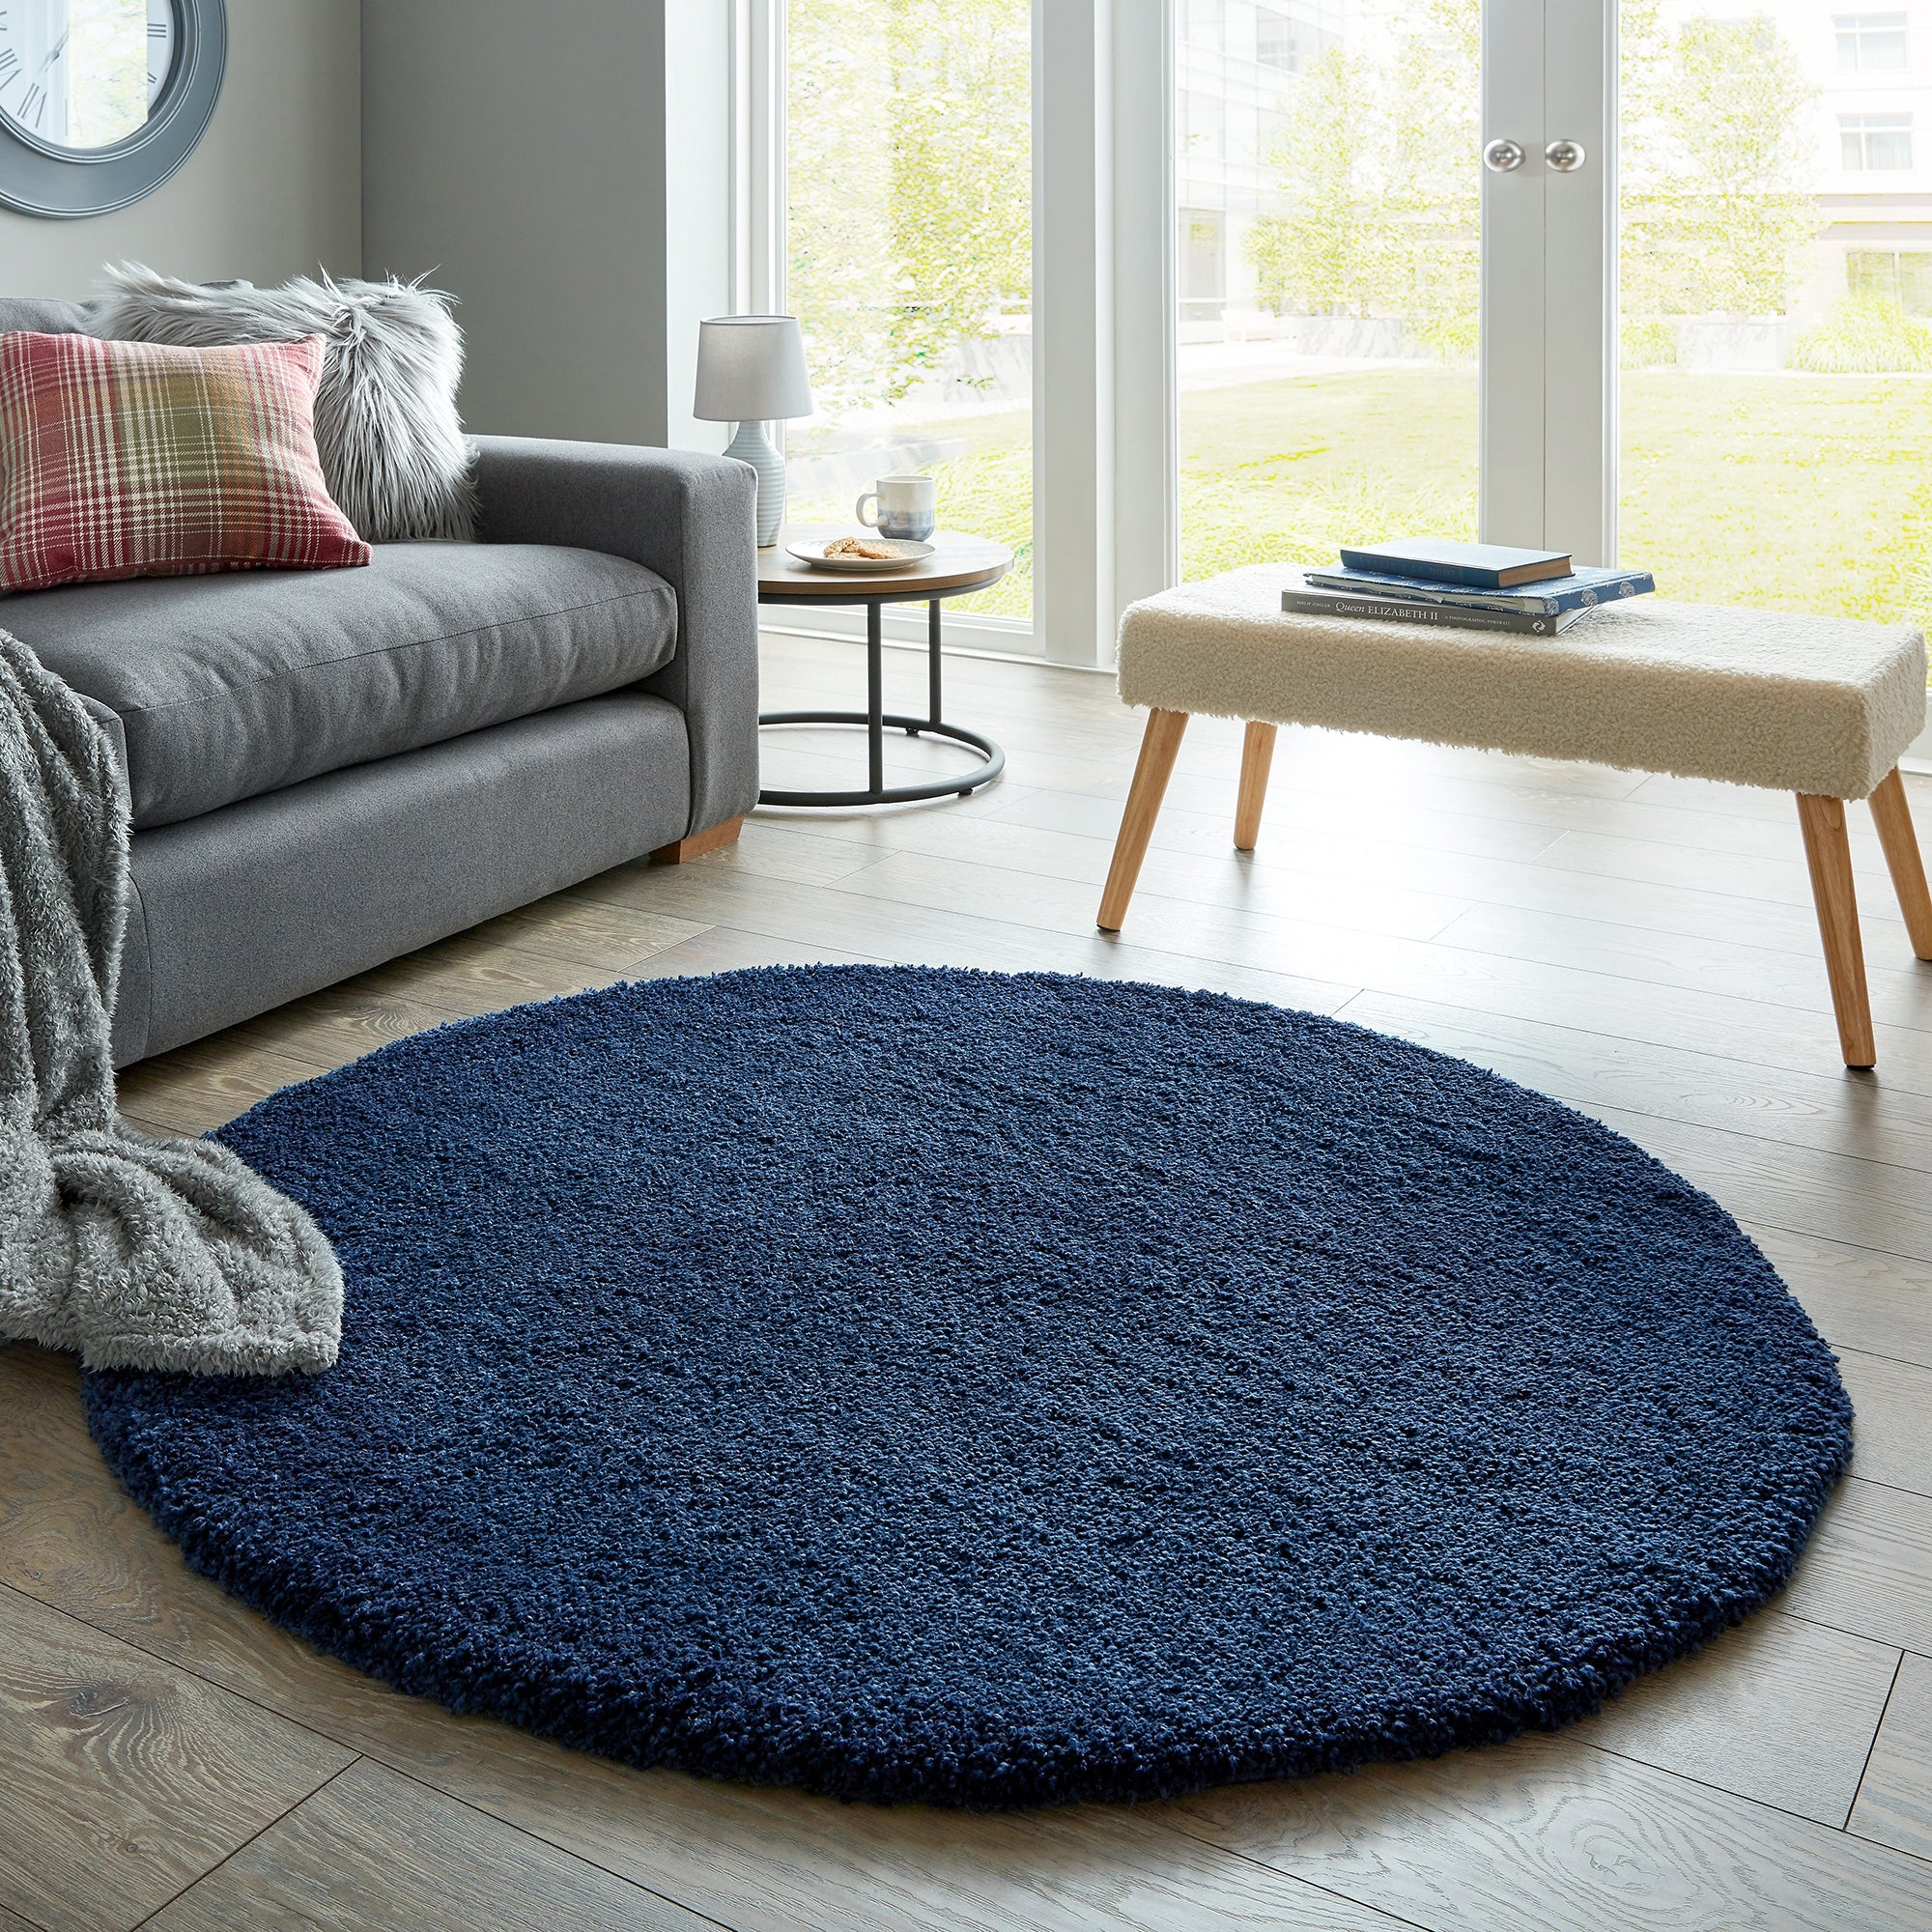 45 00 For Cosy Teddy Round Rug Navy, Navy Round Rug